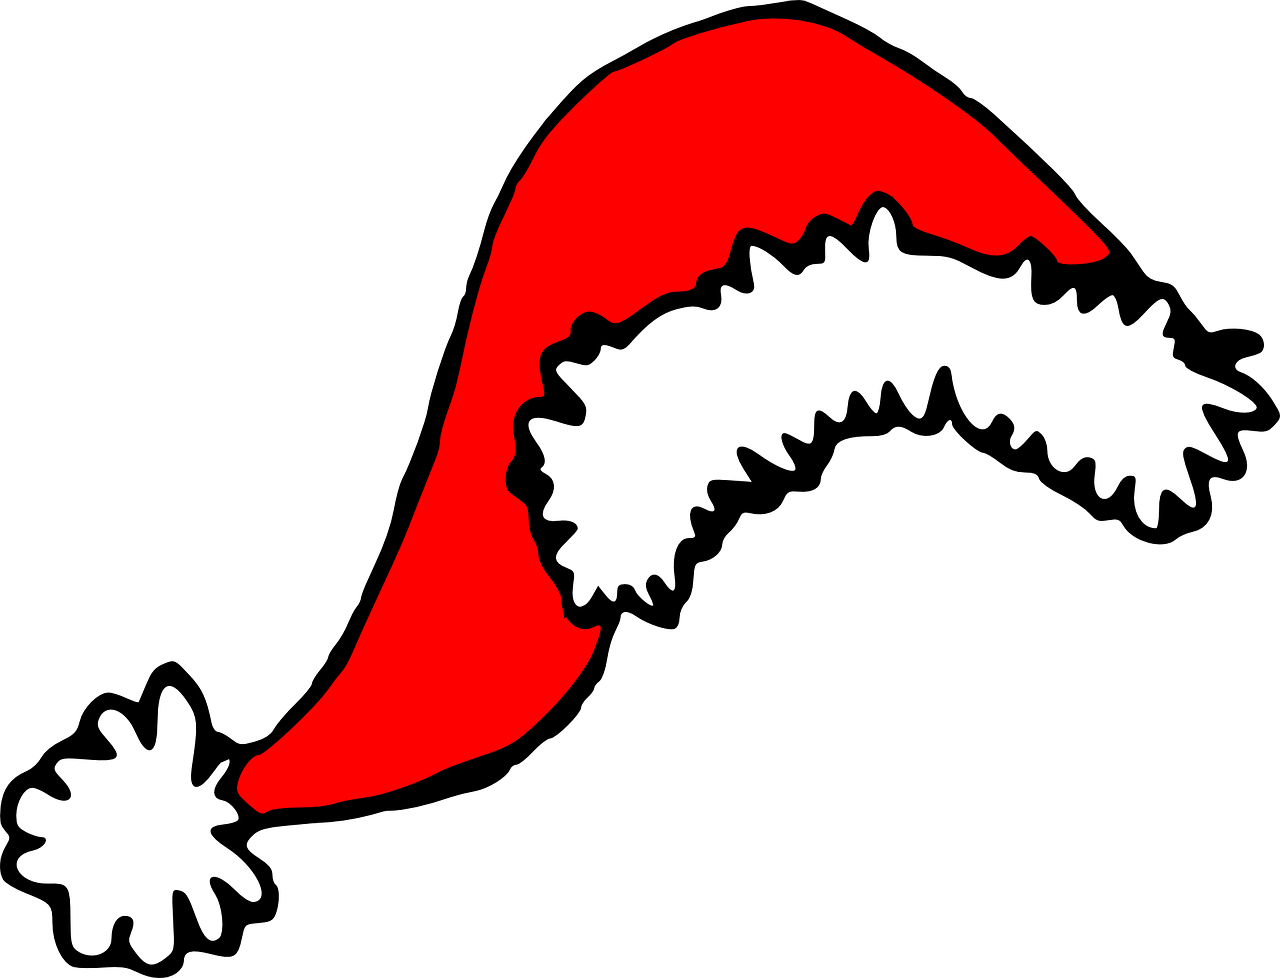 a silhouette of a person in a red hat, inspired by João Artur da Silva, hurufiyya, large tongue, very very low quality picture, zulu, image